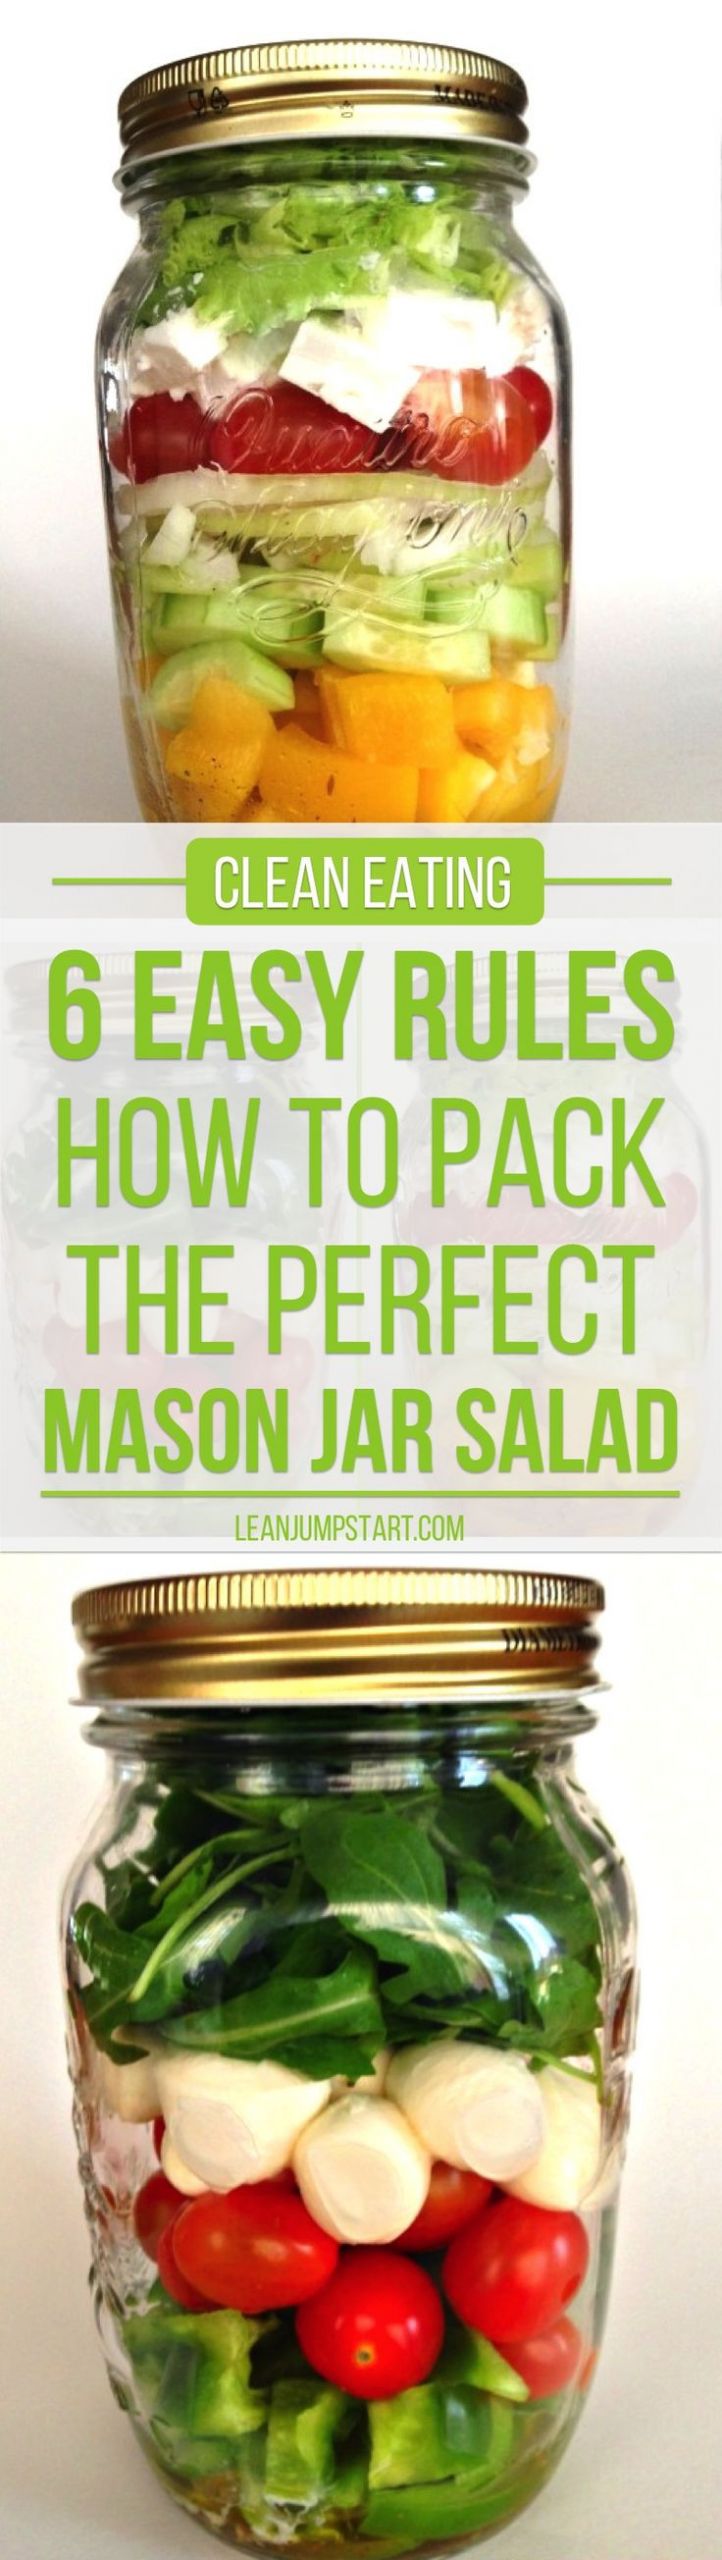 Clean Eating Diet Recipes
 Mason Jar Salad 6 Rules How to Pack it Perfectly For a